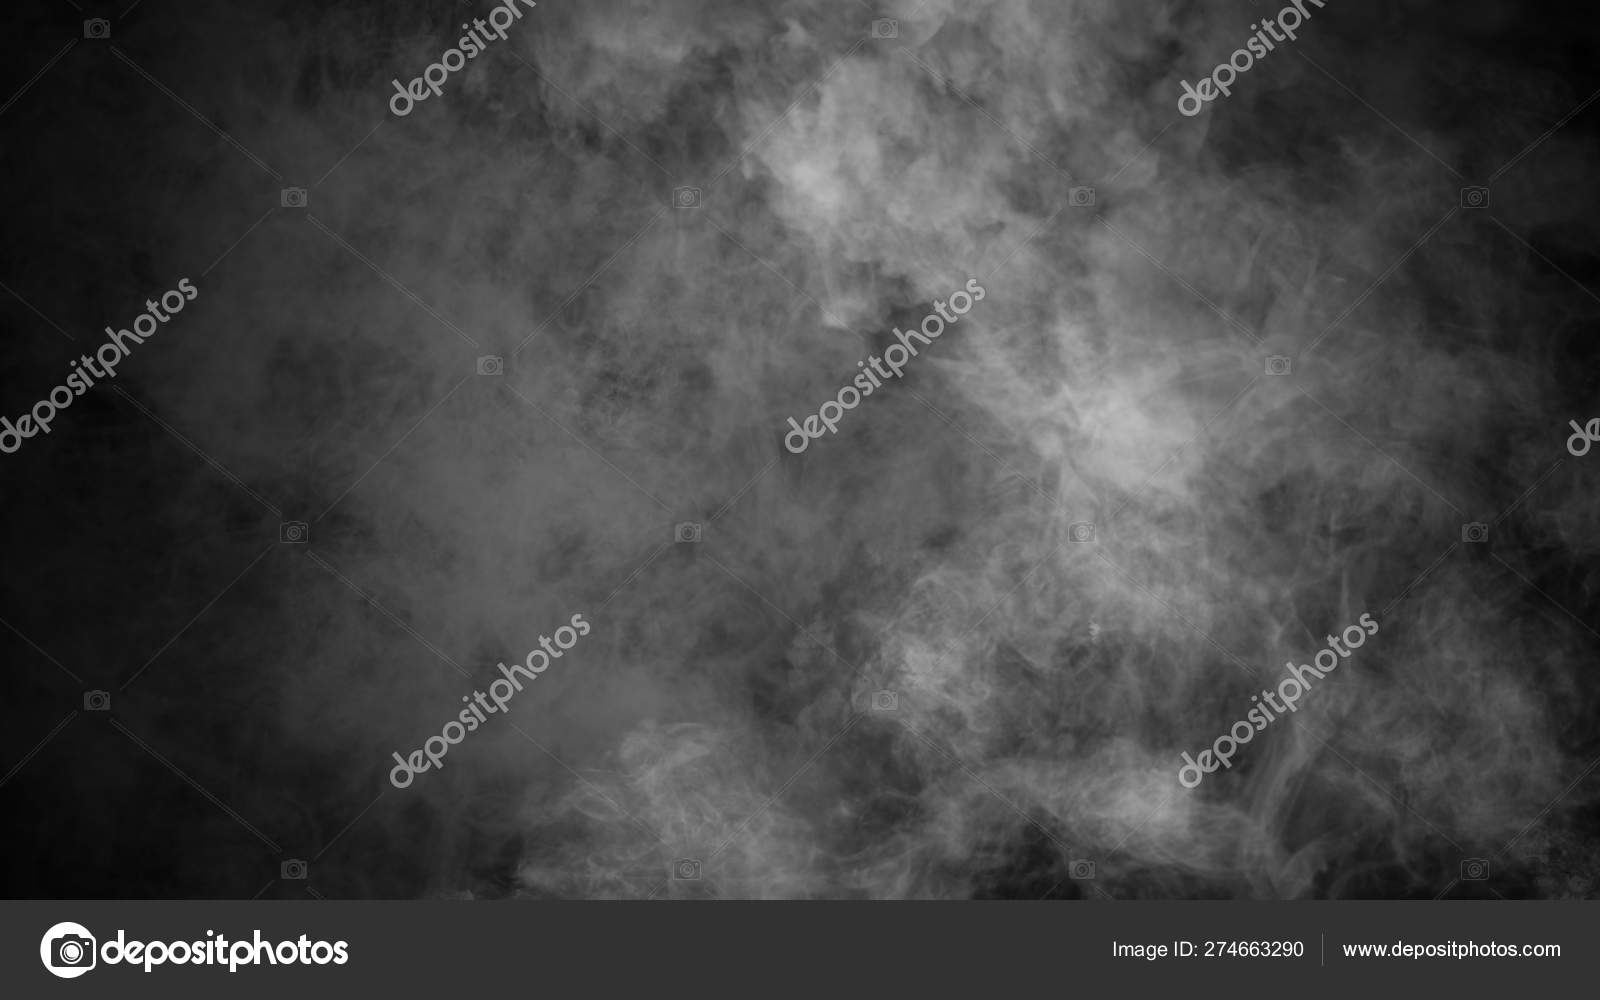 Mistery Smoke Background Abstract Fog Texture Overlays For Copyspace Design Element Stock Photo C Yufa12379 Gmail Com 274663290